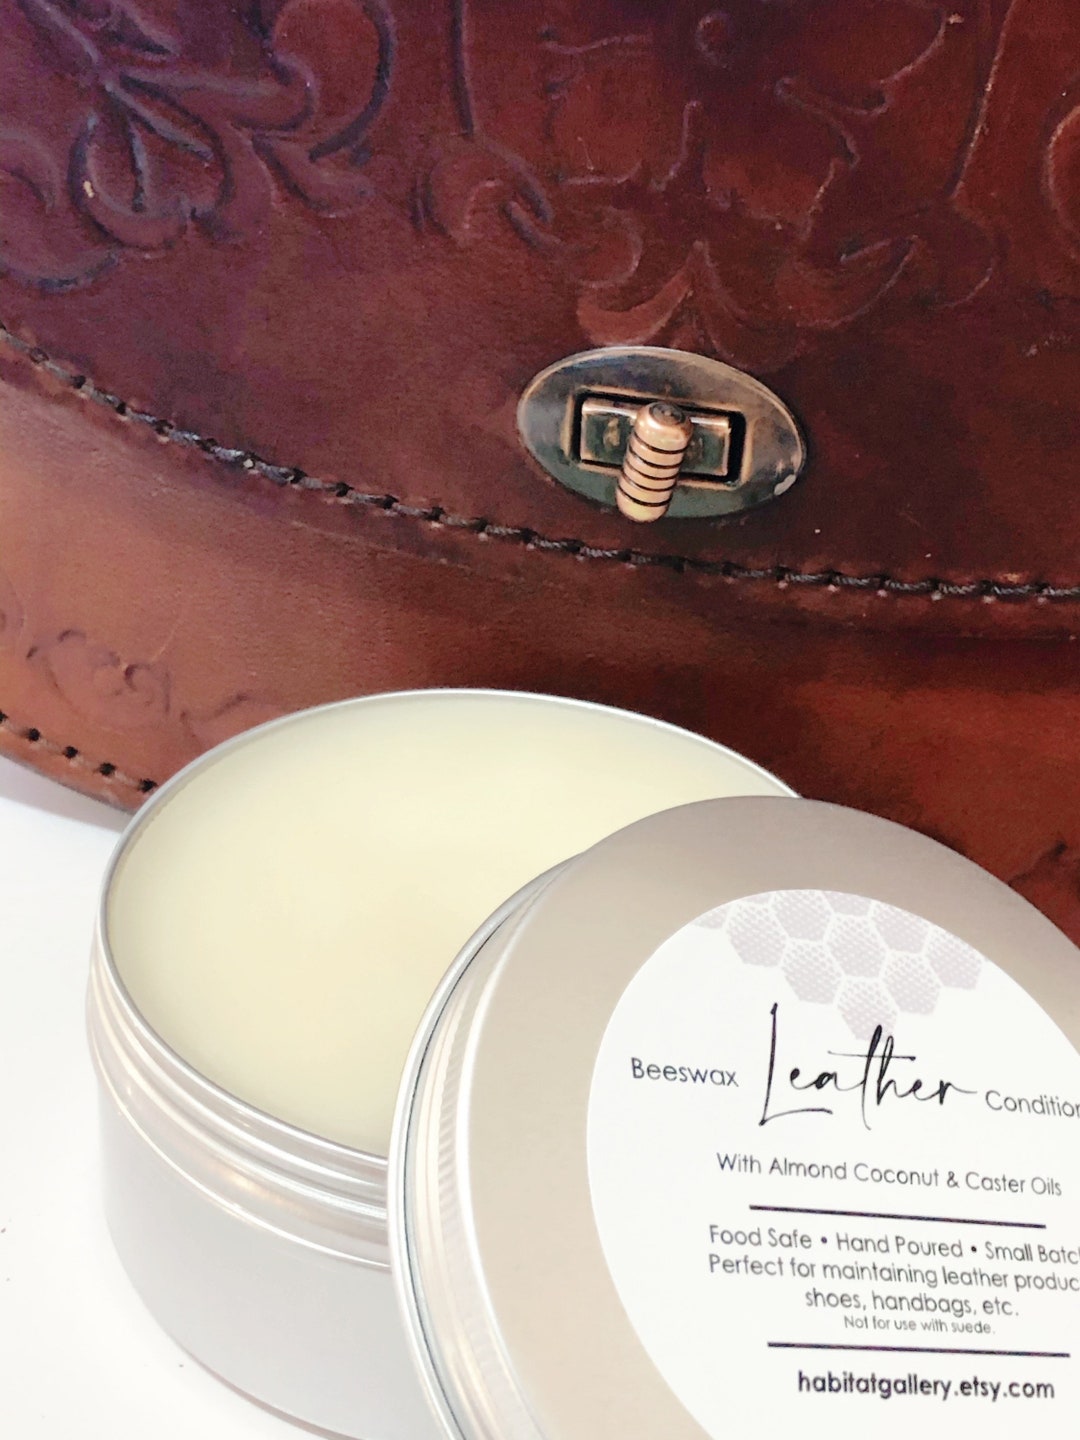 Homemade Beeswax Leather Shoe Polish Conditioner Recipe